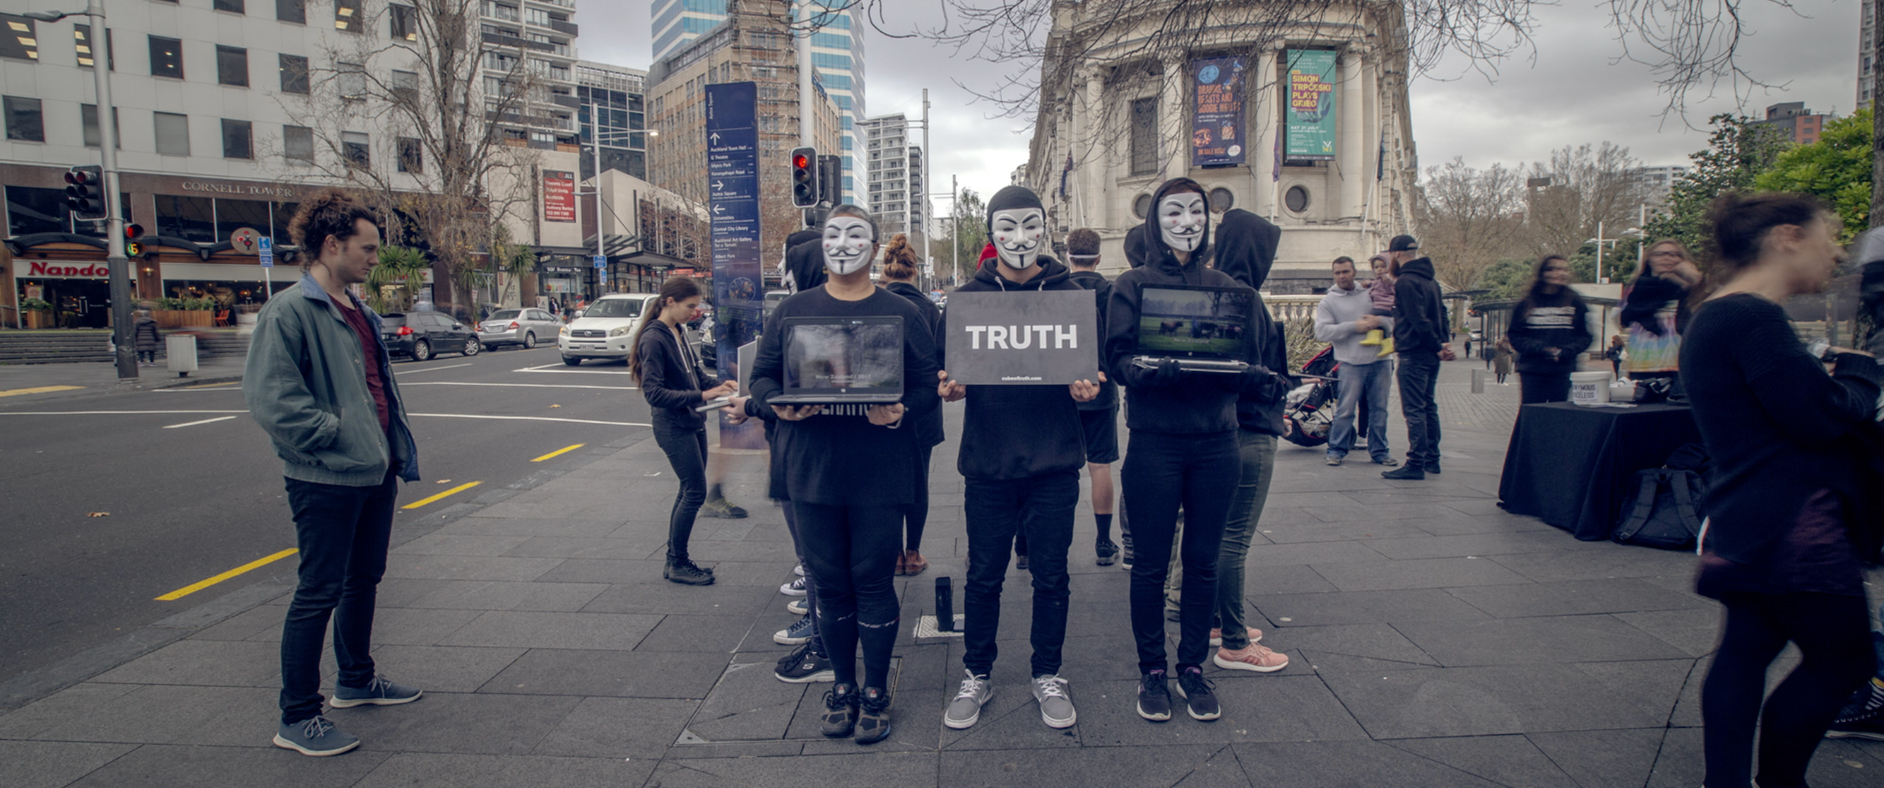 Hero image for Loading Docs 2018 - The Cube of Truth